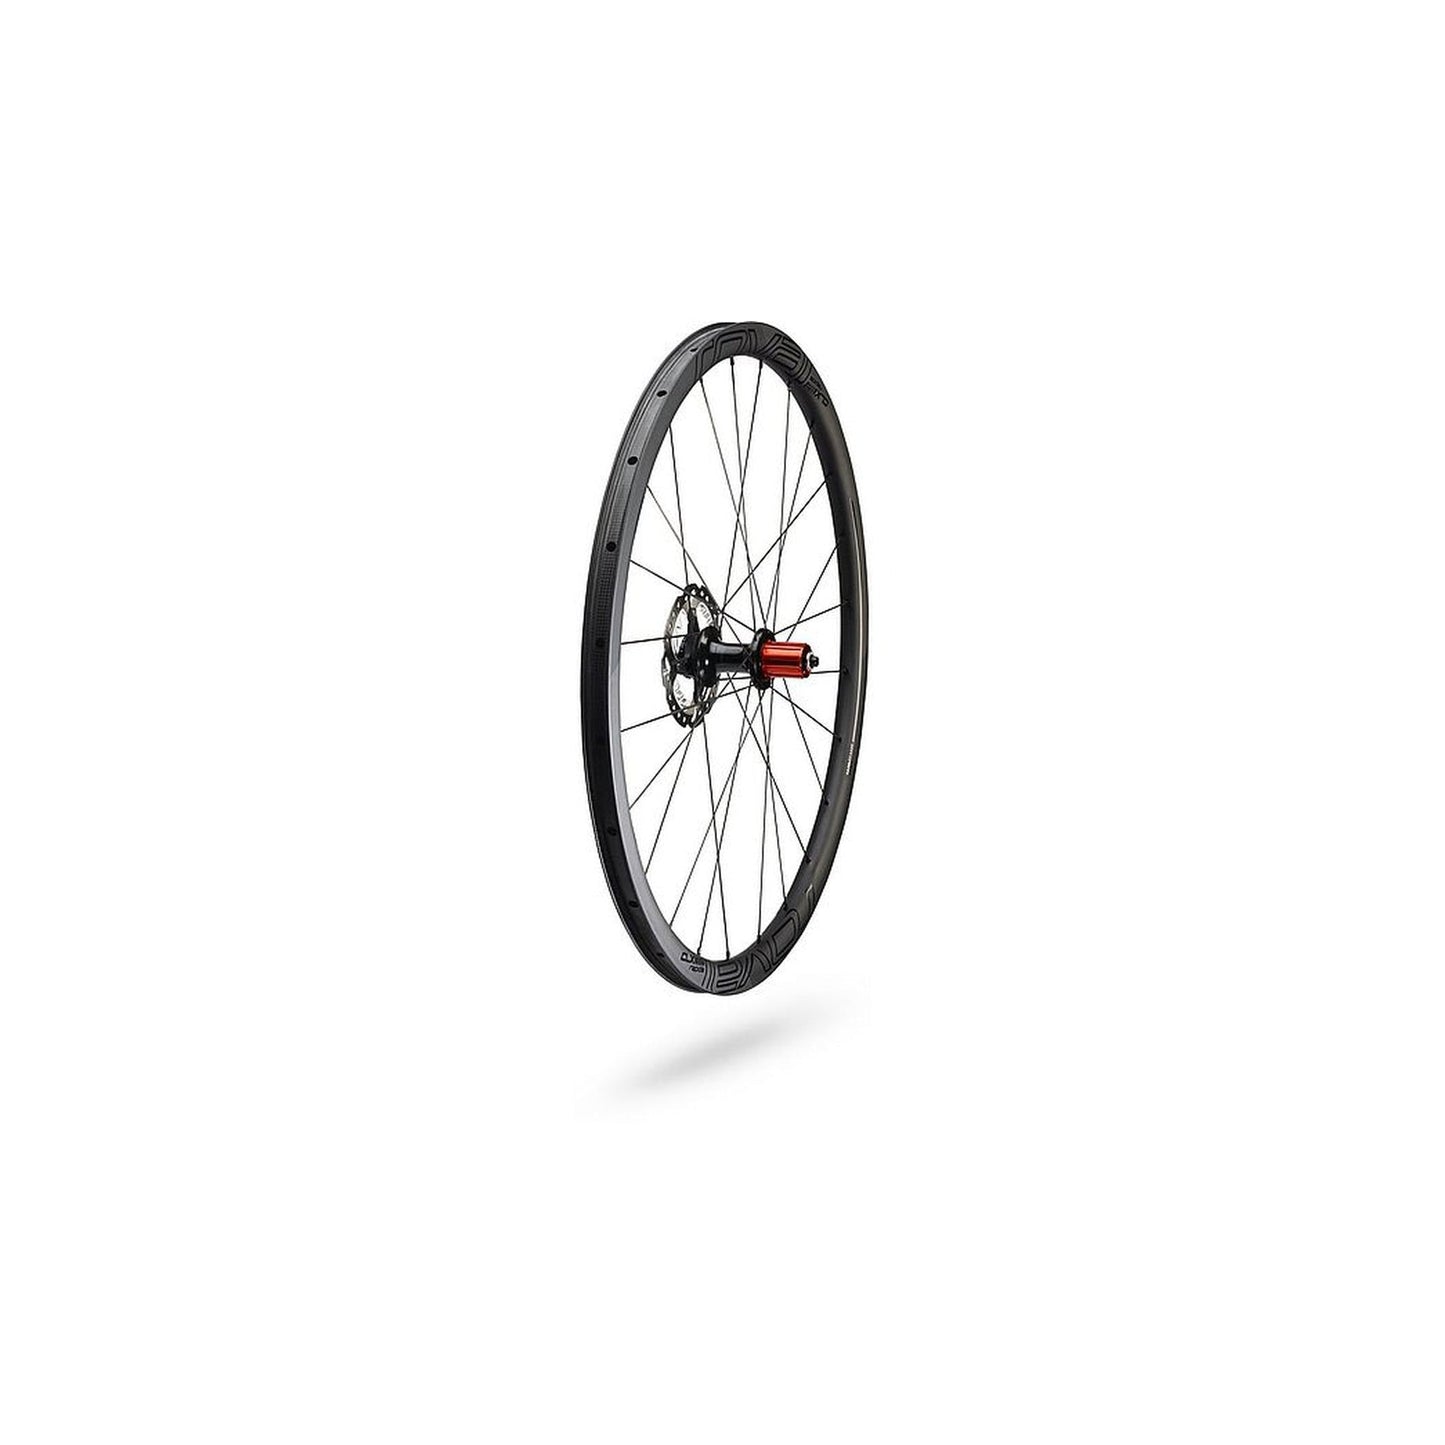 Roval CLX 32 Disc Ð Rear-Cycles Direct Specialized